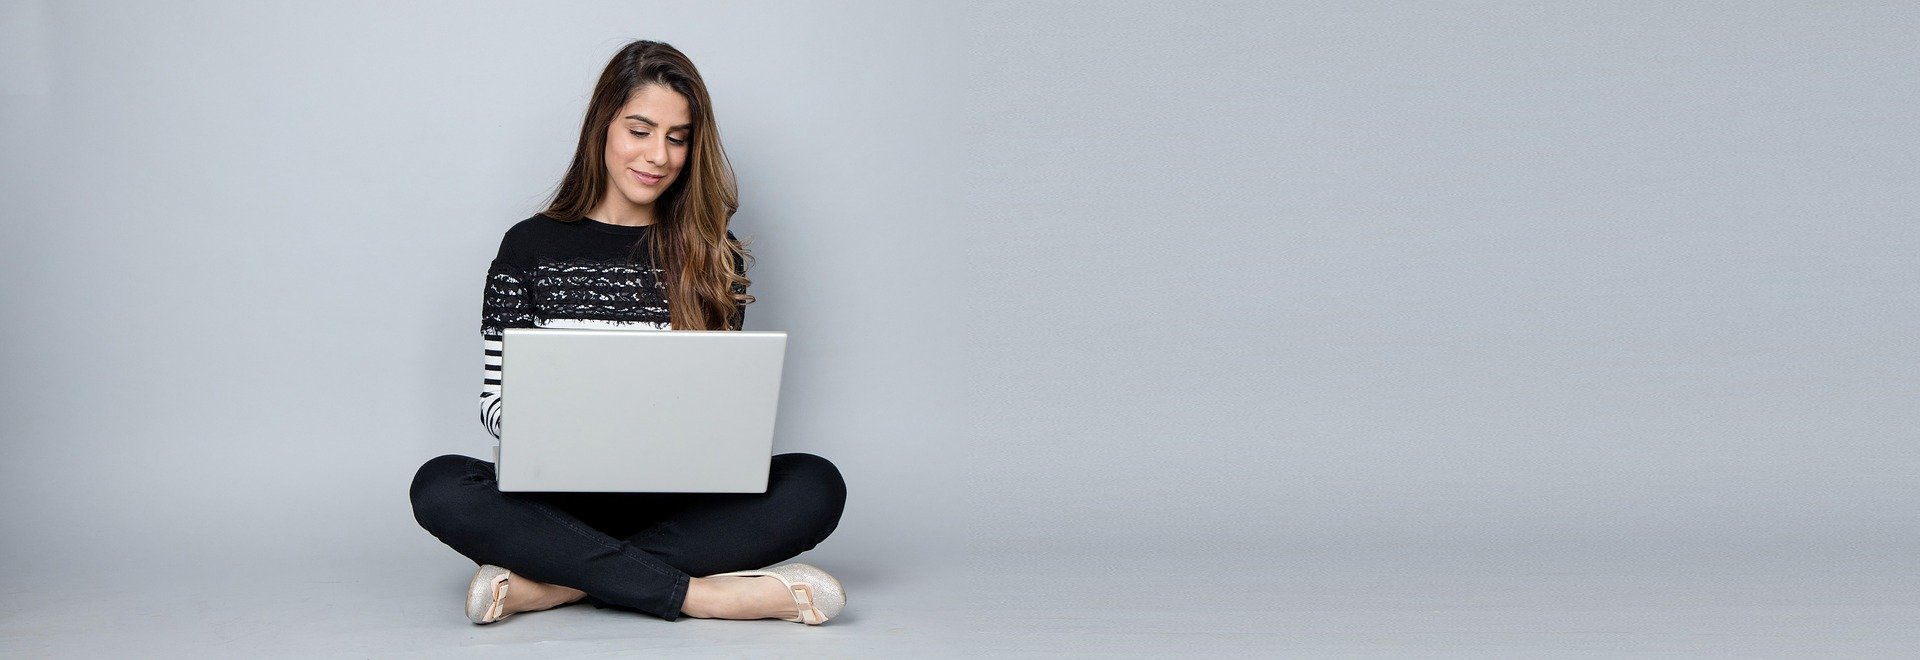 woman on laptop sitting against wall